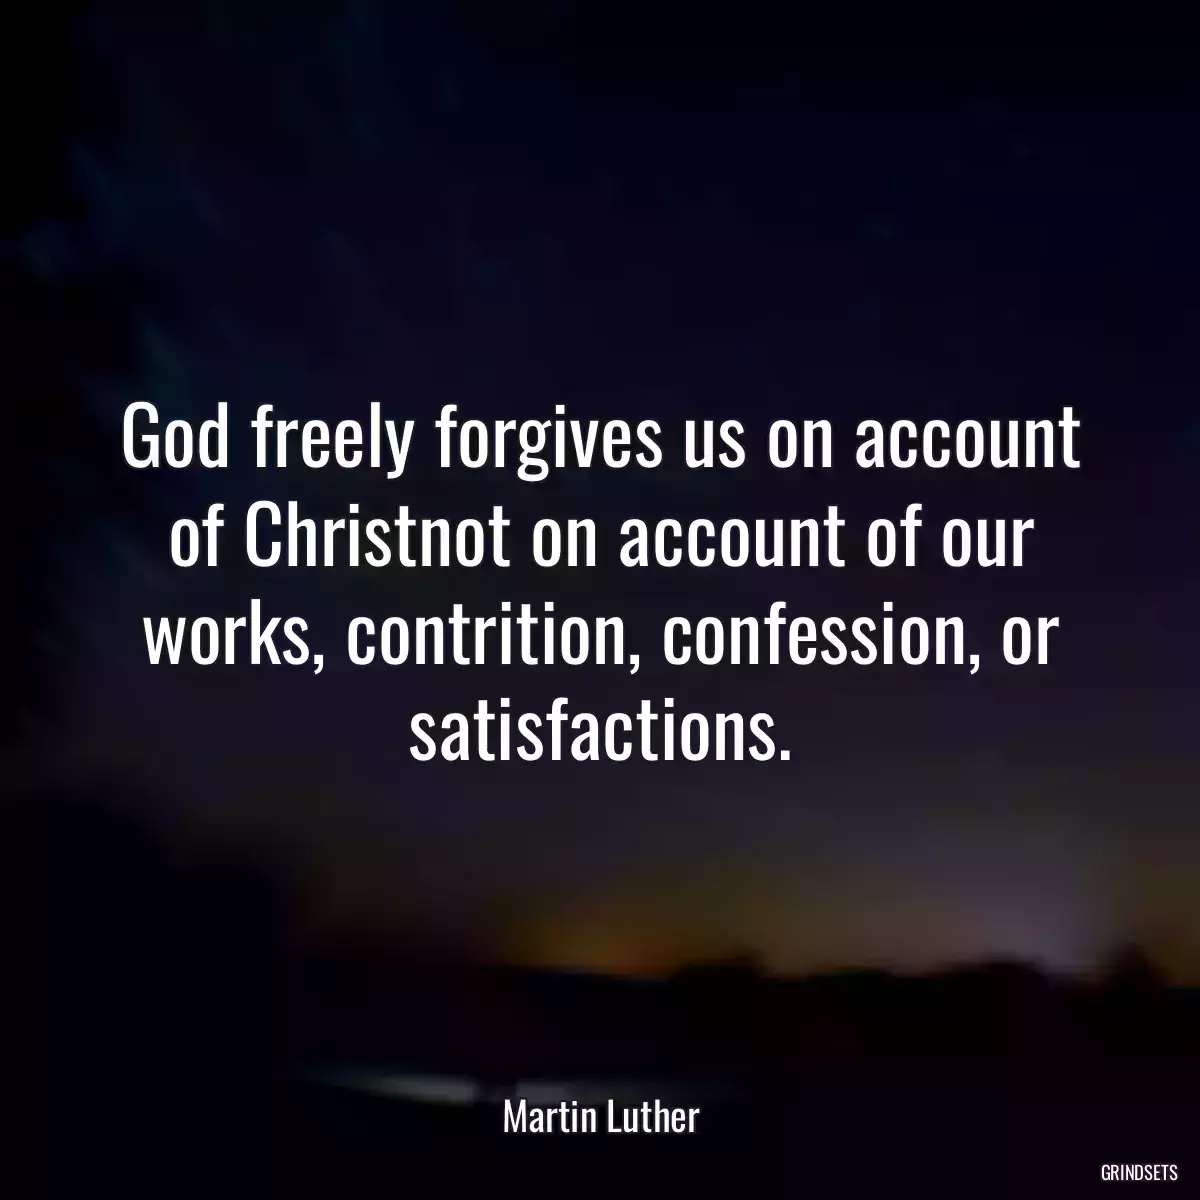 God freely forgives us on account of Christnot on account of our works, contrition, confession, or satisfactions.